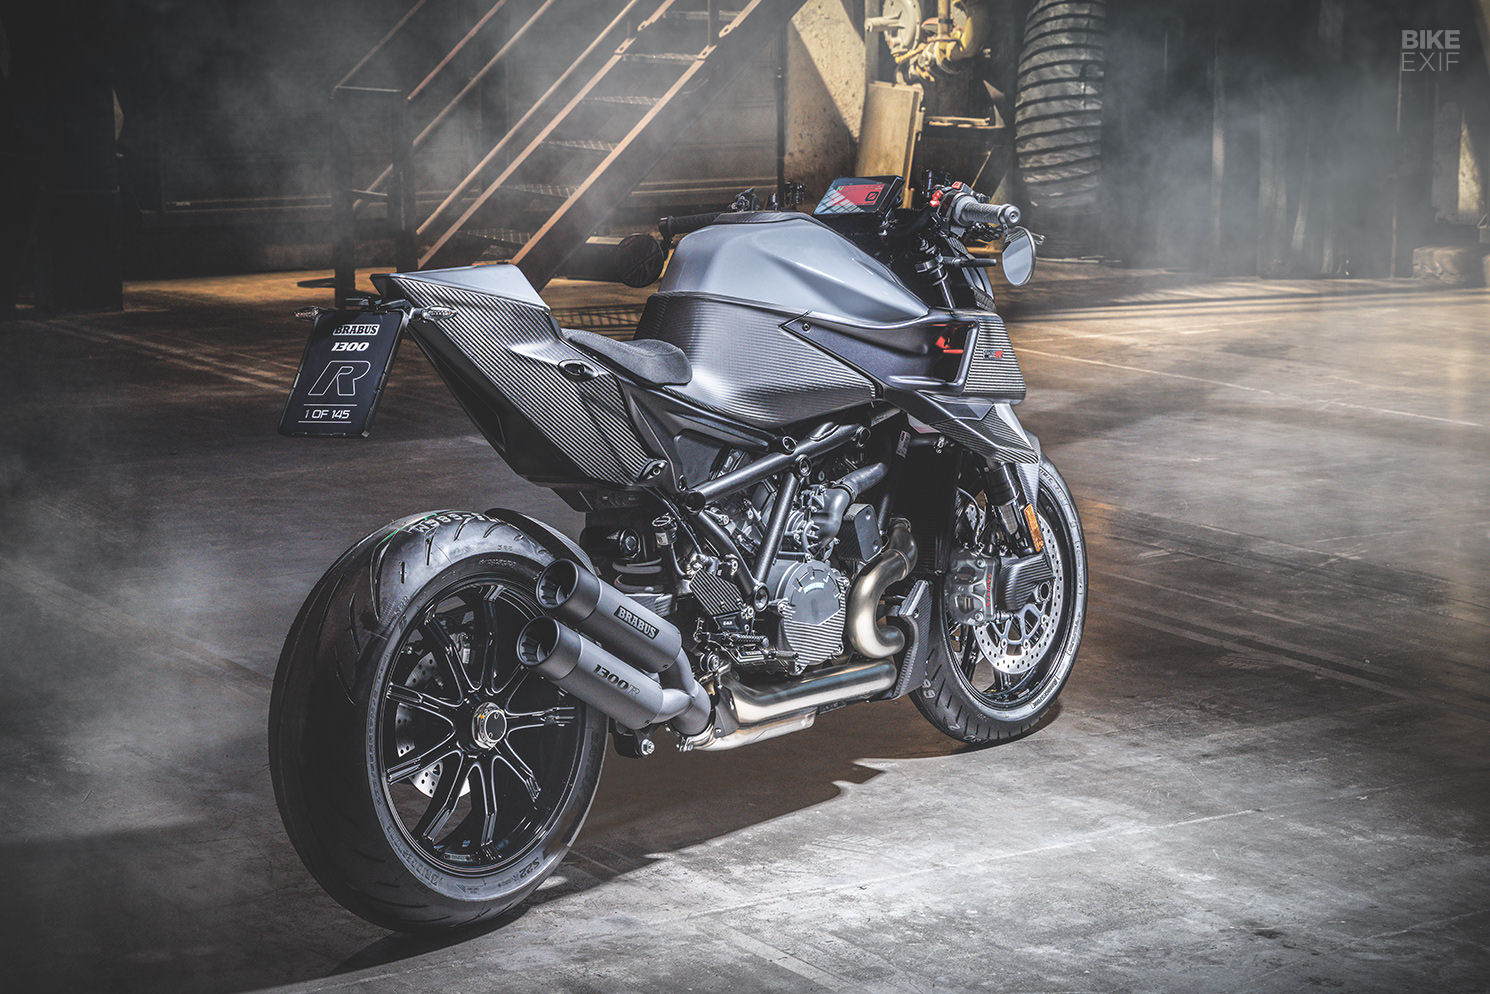 Brabus 1300 R: What happens when Brabus gets ahold of a KTM 1290?